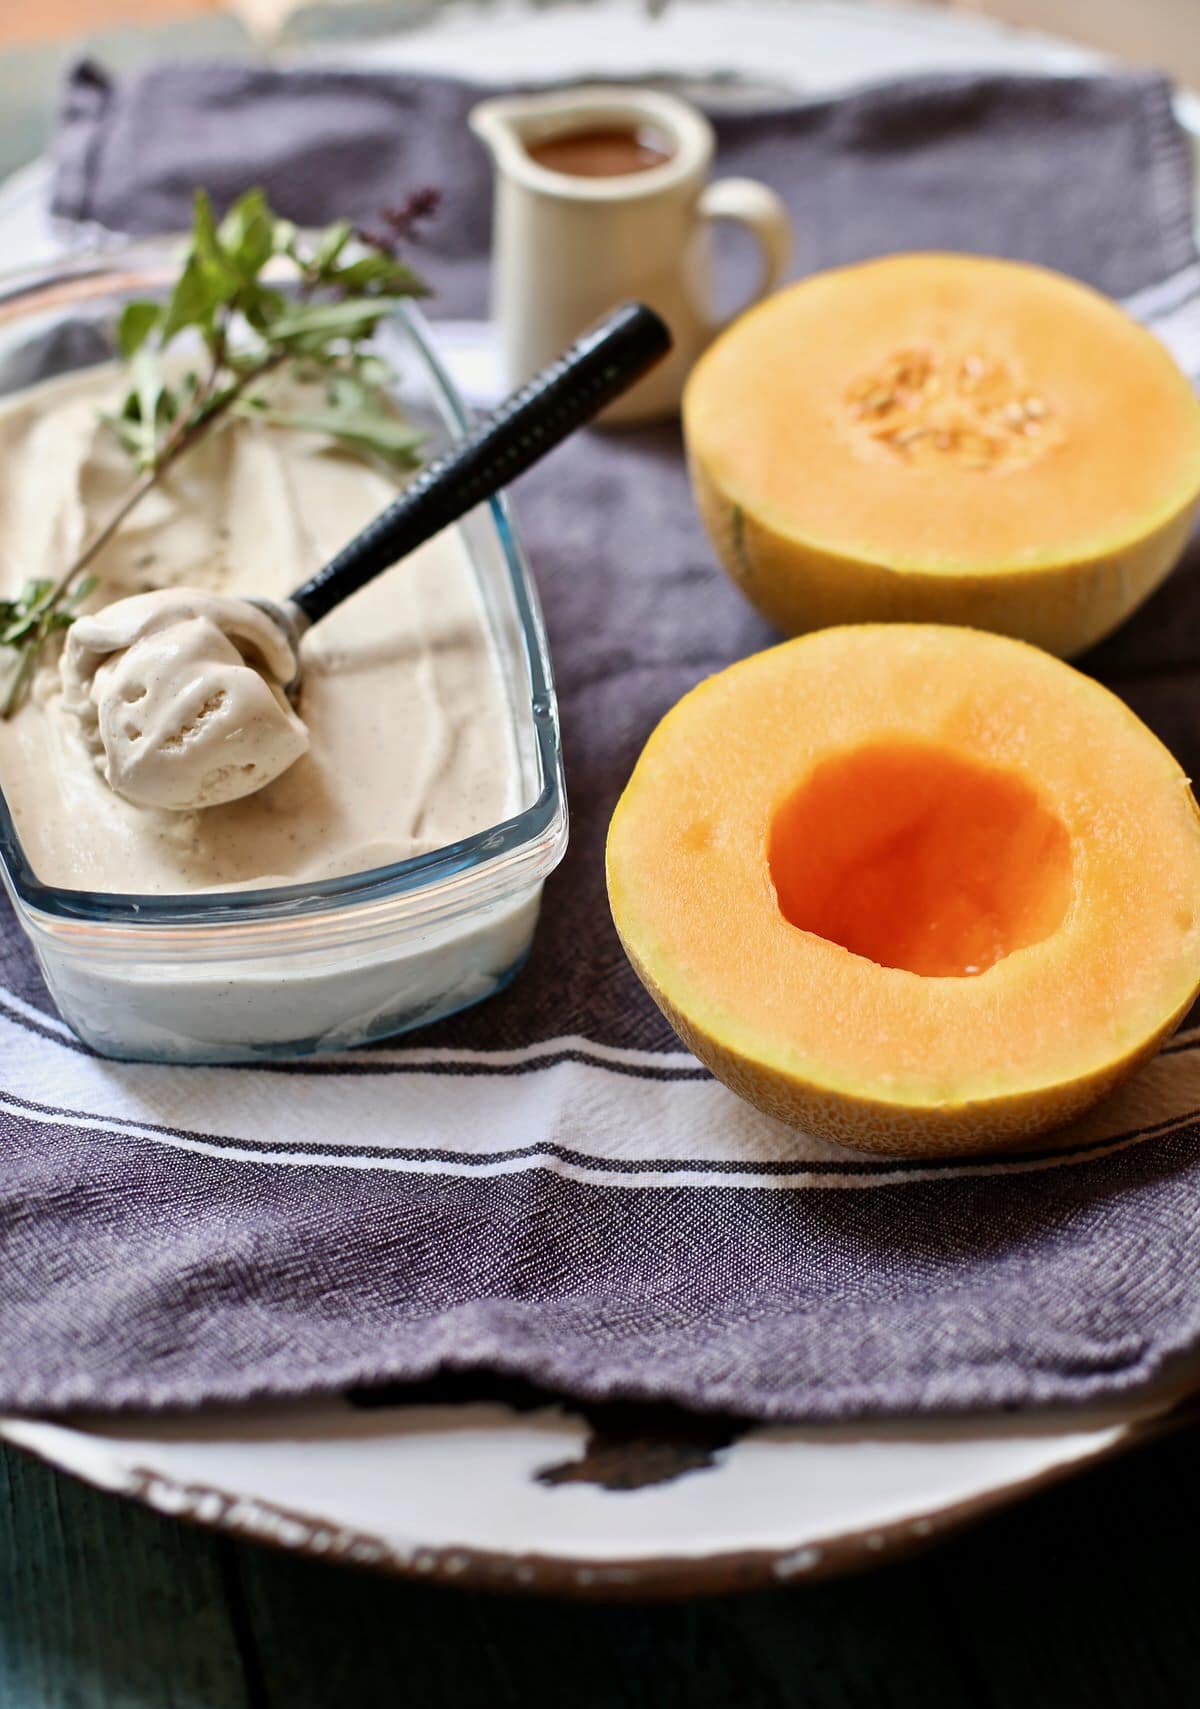 two melon halves and some ice cream om a gray tablecloth